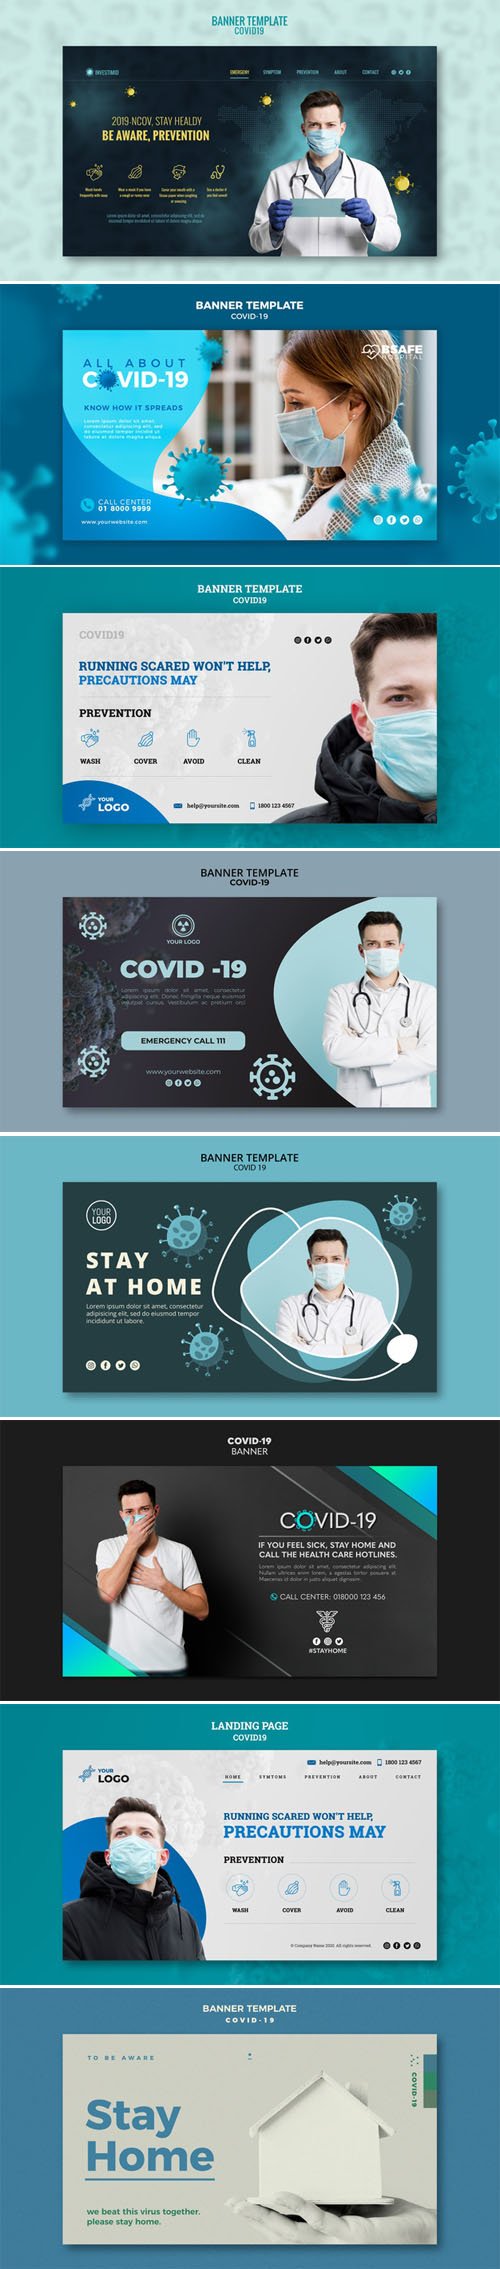 8 Covid-19 Banners PSD Templates